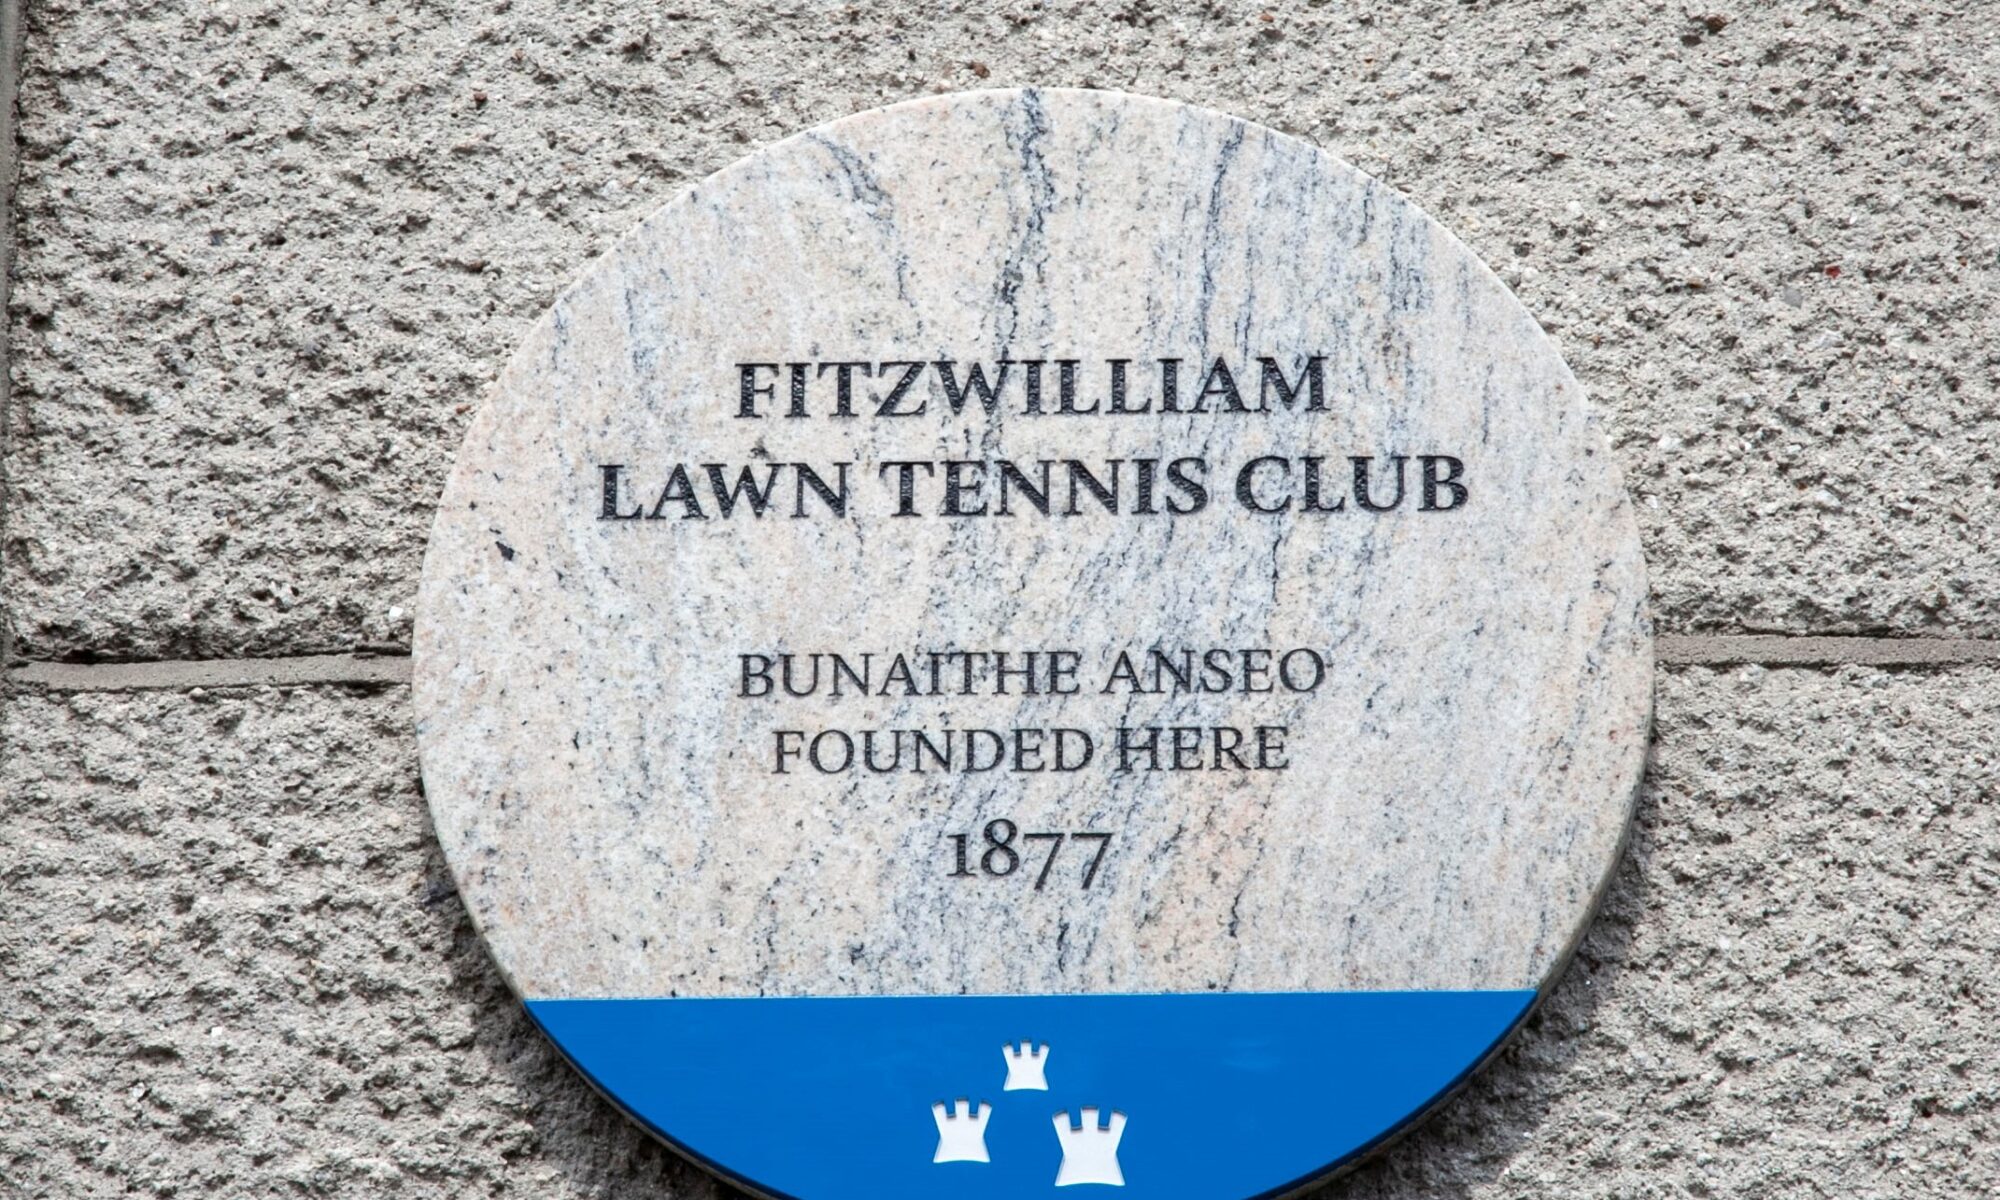 Photograph of a Dublin City Council commemorative plaque. The text on the plaque reads 'Fitzwilliam Lawn Tennis Club bunaithe anseo founded here 1877'.